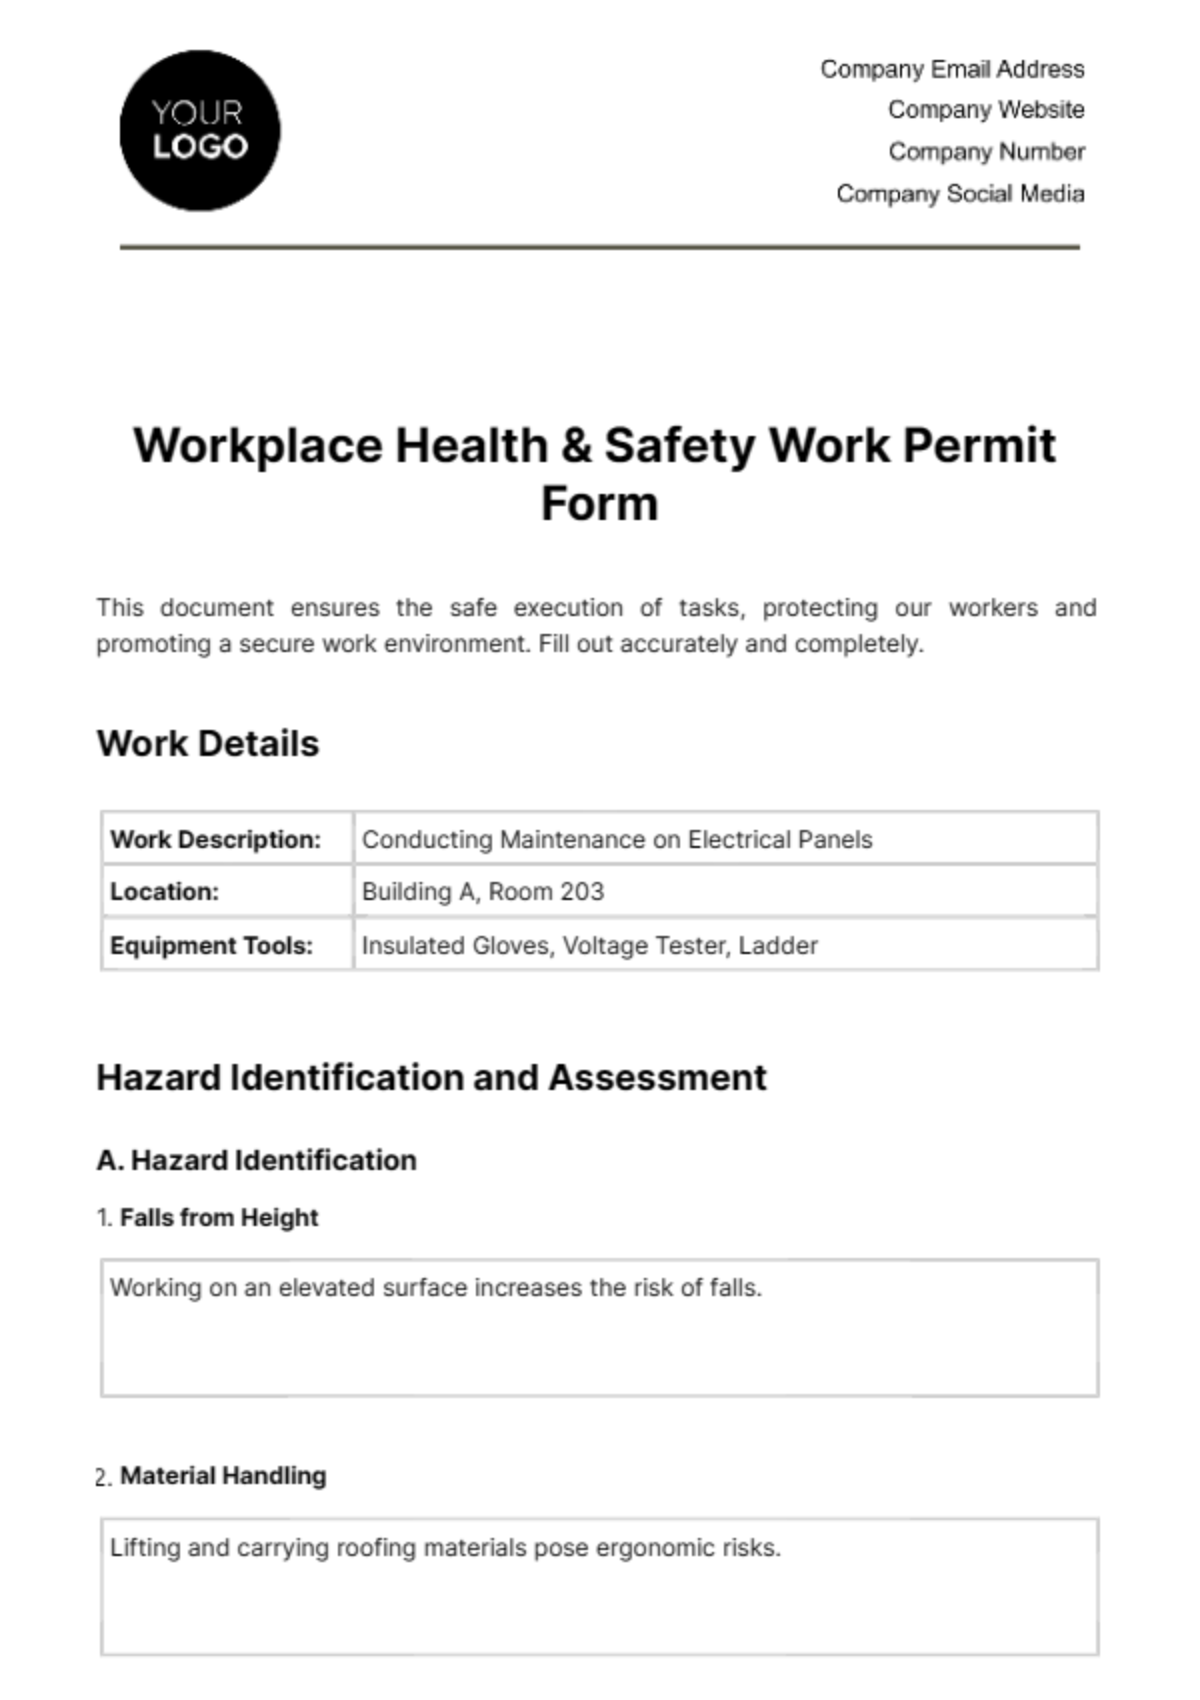 Free Workplace Health & Safety Work Permit Form Template